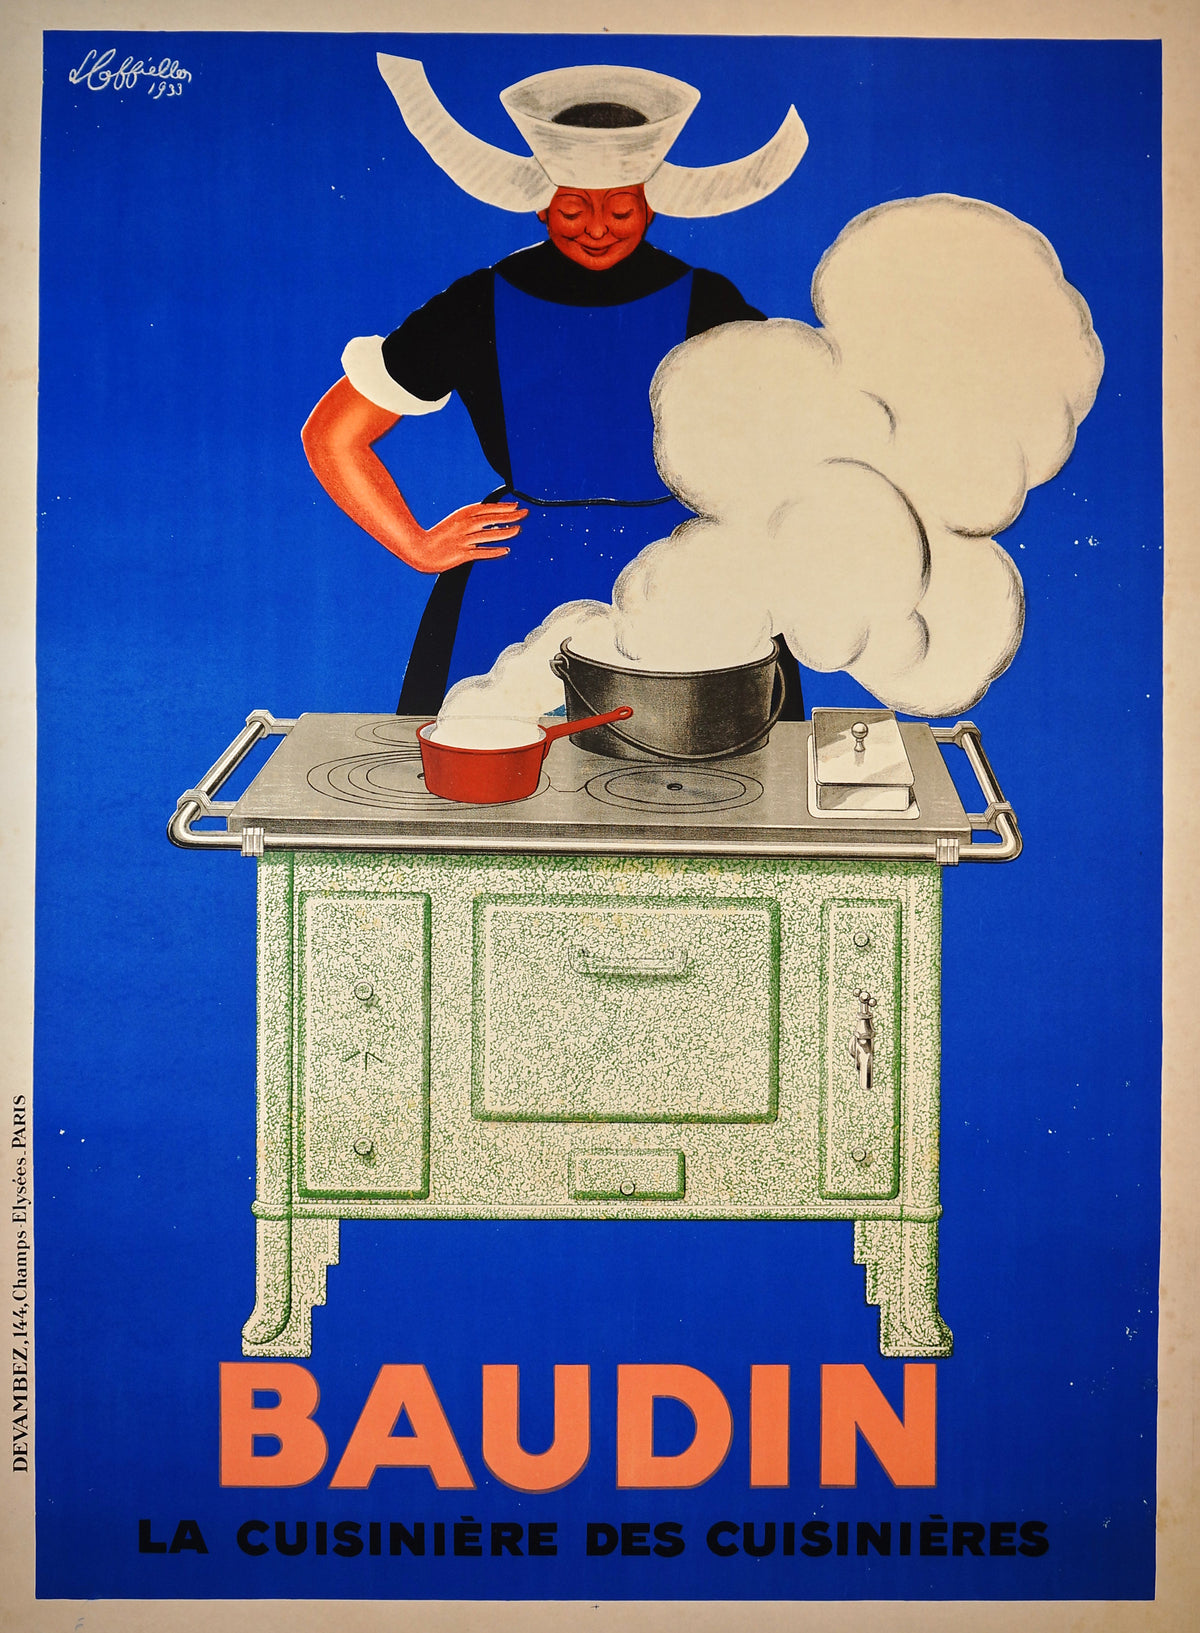 Baudin by Leonetto Cappiello - Authentic Vintage Poster